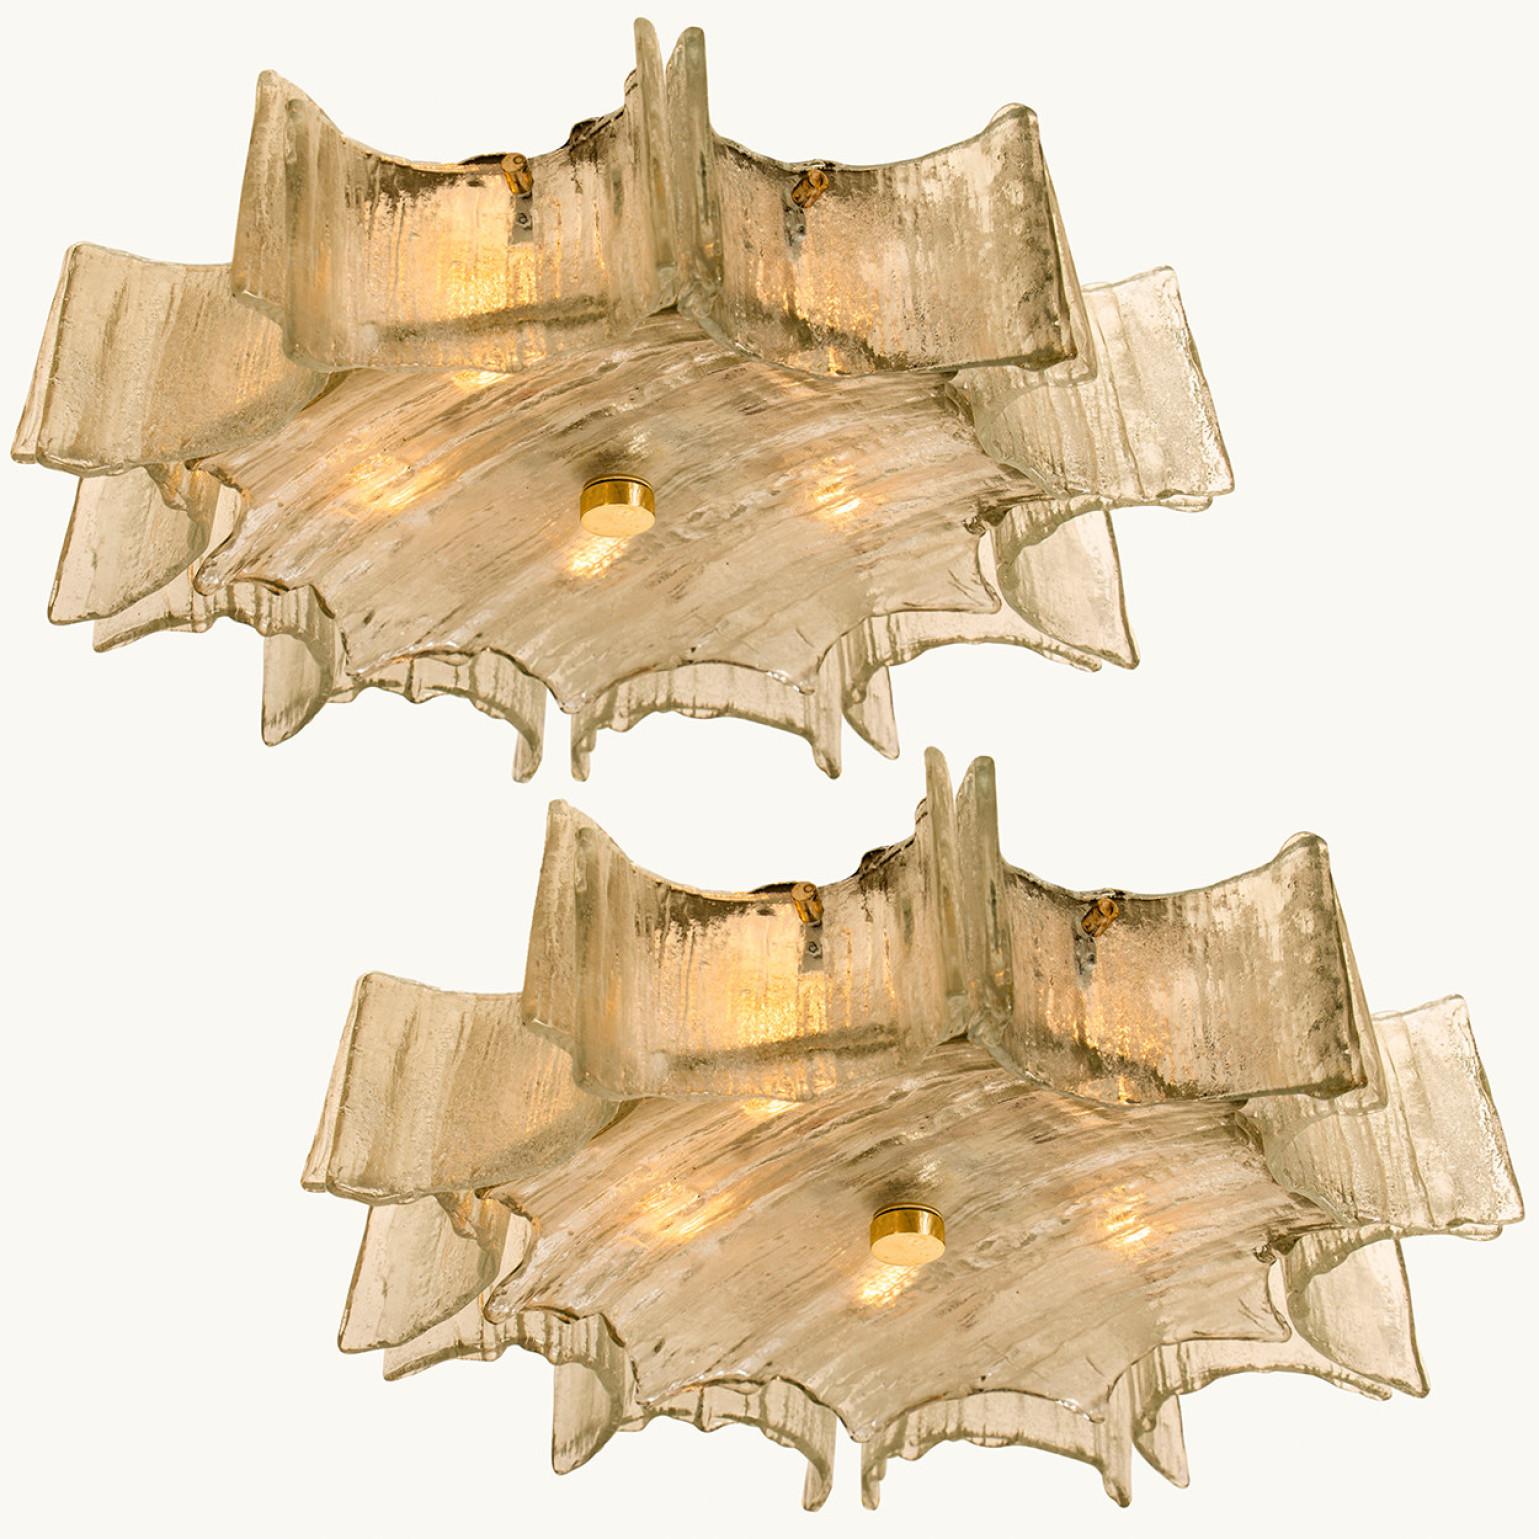 Stunning flush mount with textured glass and brass details. Minimalistic design executed with a taste for excellence in craftsmanship.
The textured glass creates beautiful variations and patterns in light and shadow.

The fixture requires 5 x E14